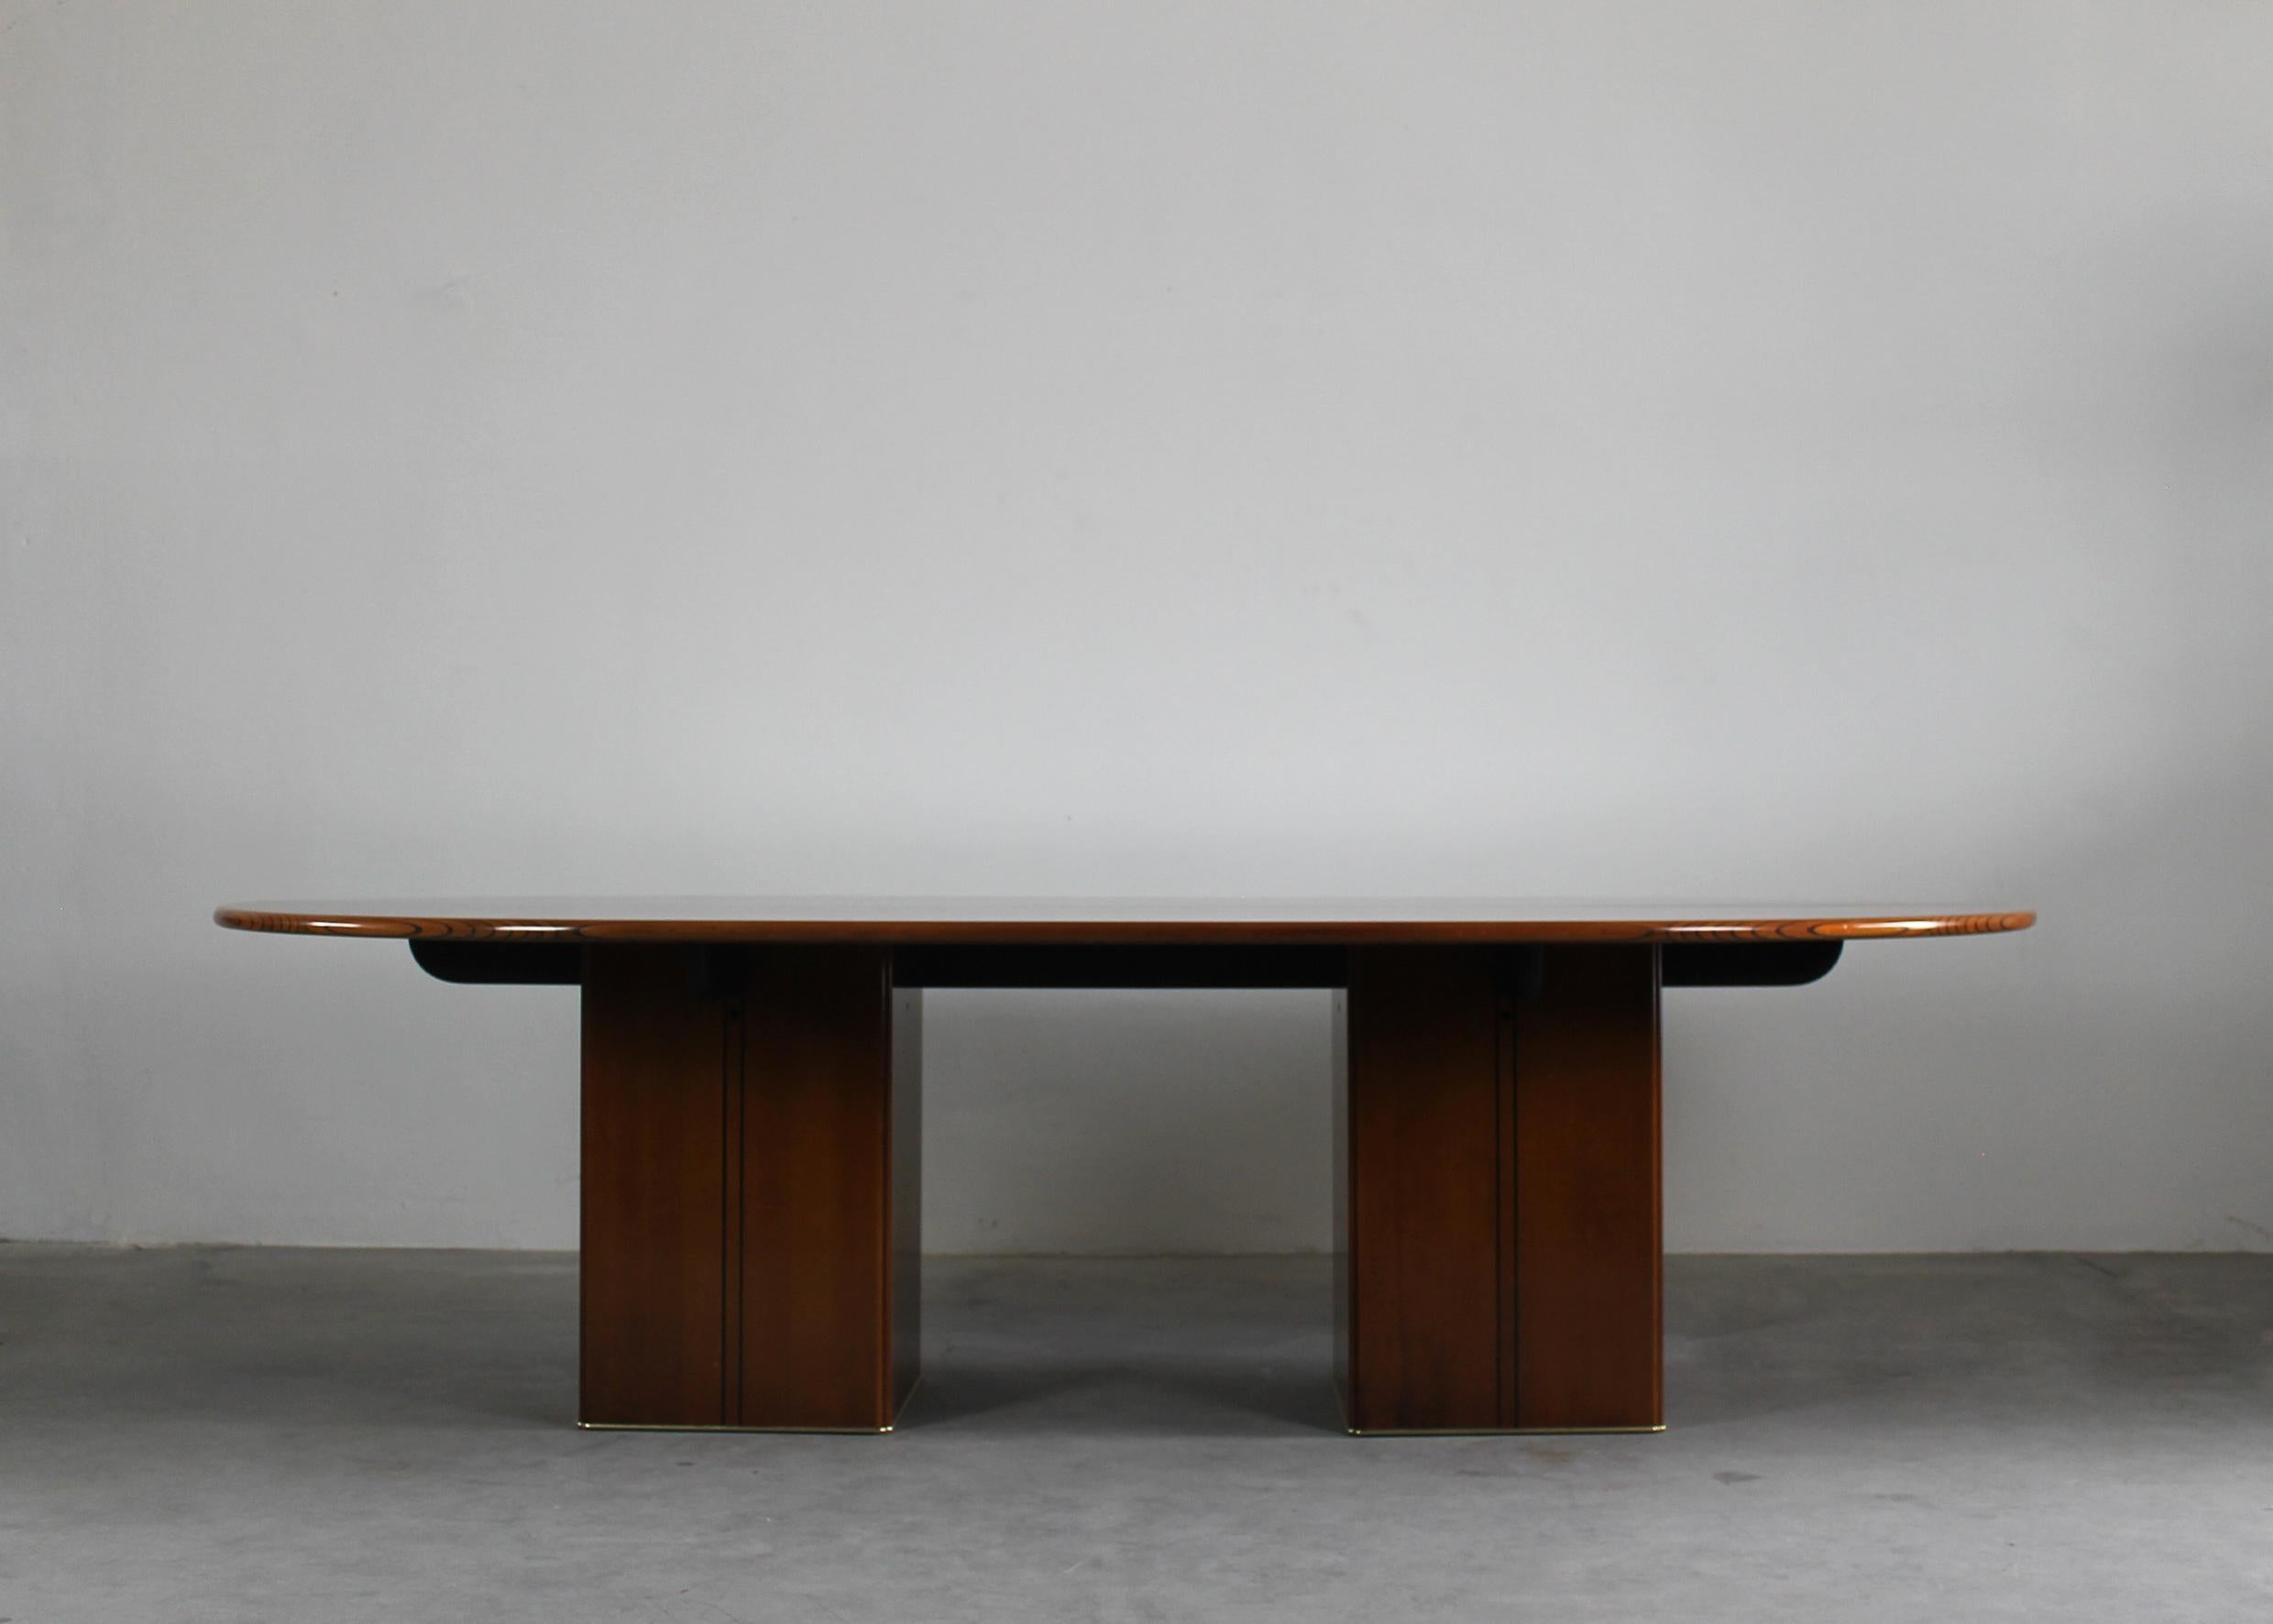 Large oval-shaped table in walnut and burl wood with brass details, the tabletop is made in two pieces which are divided over the length, and it is supported by two square column legs. 

Designed by Tobia and Afra Scarpa for Maxalto 1970s

Tobia